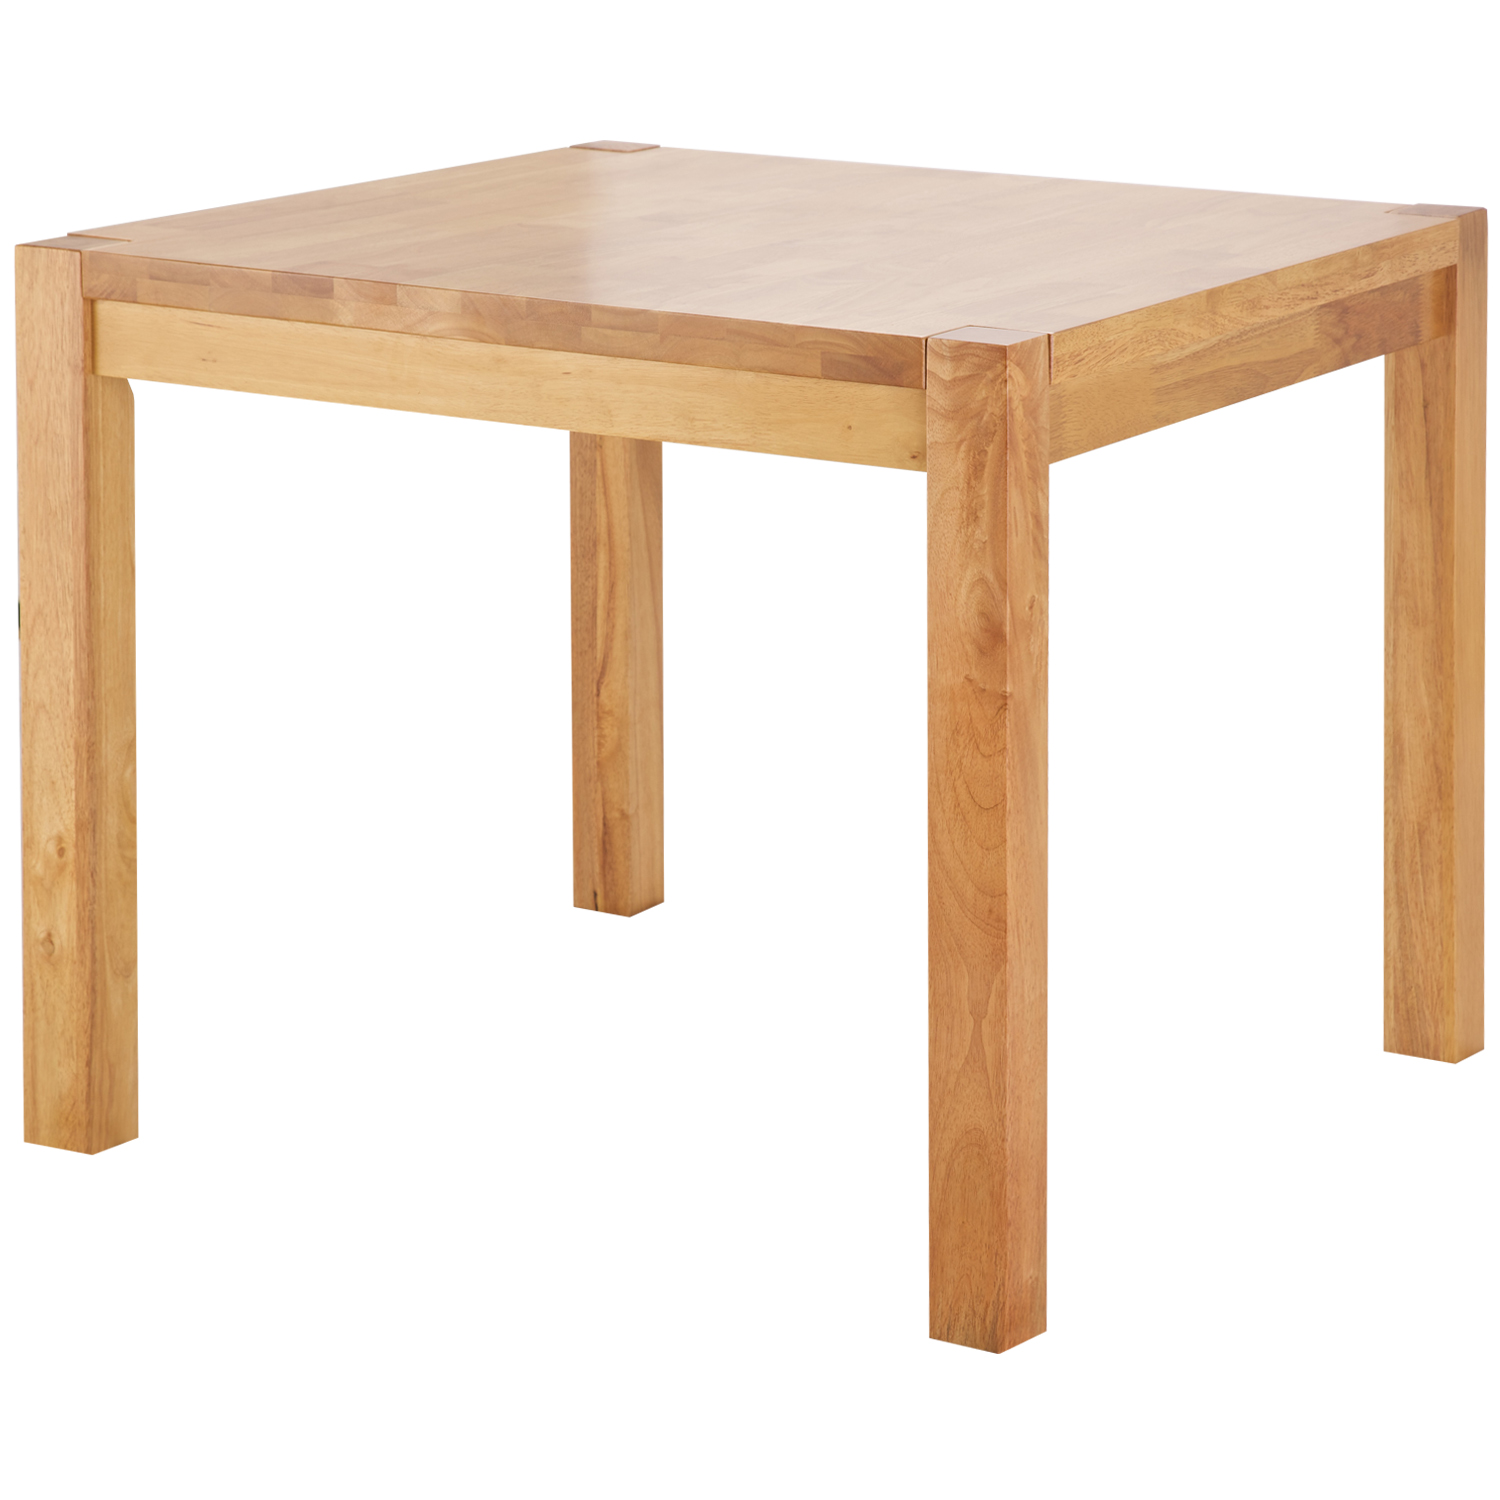 Dining tables square